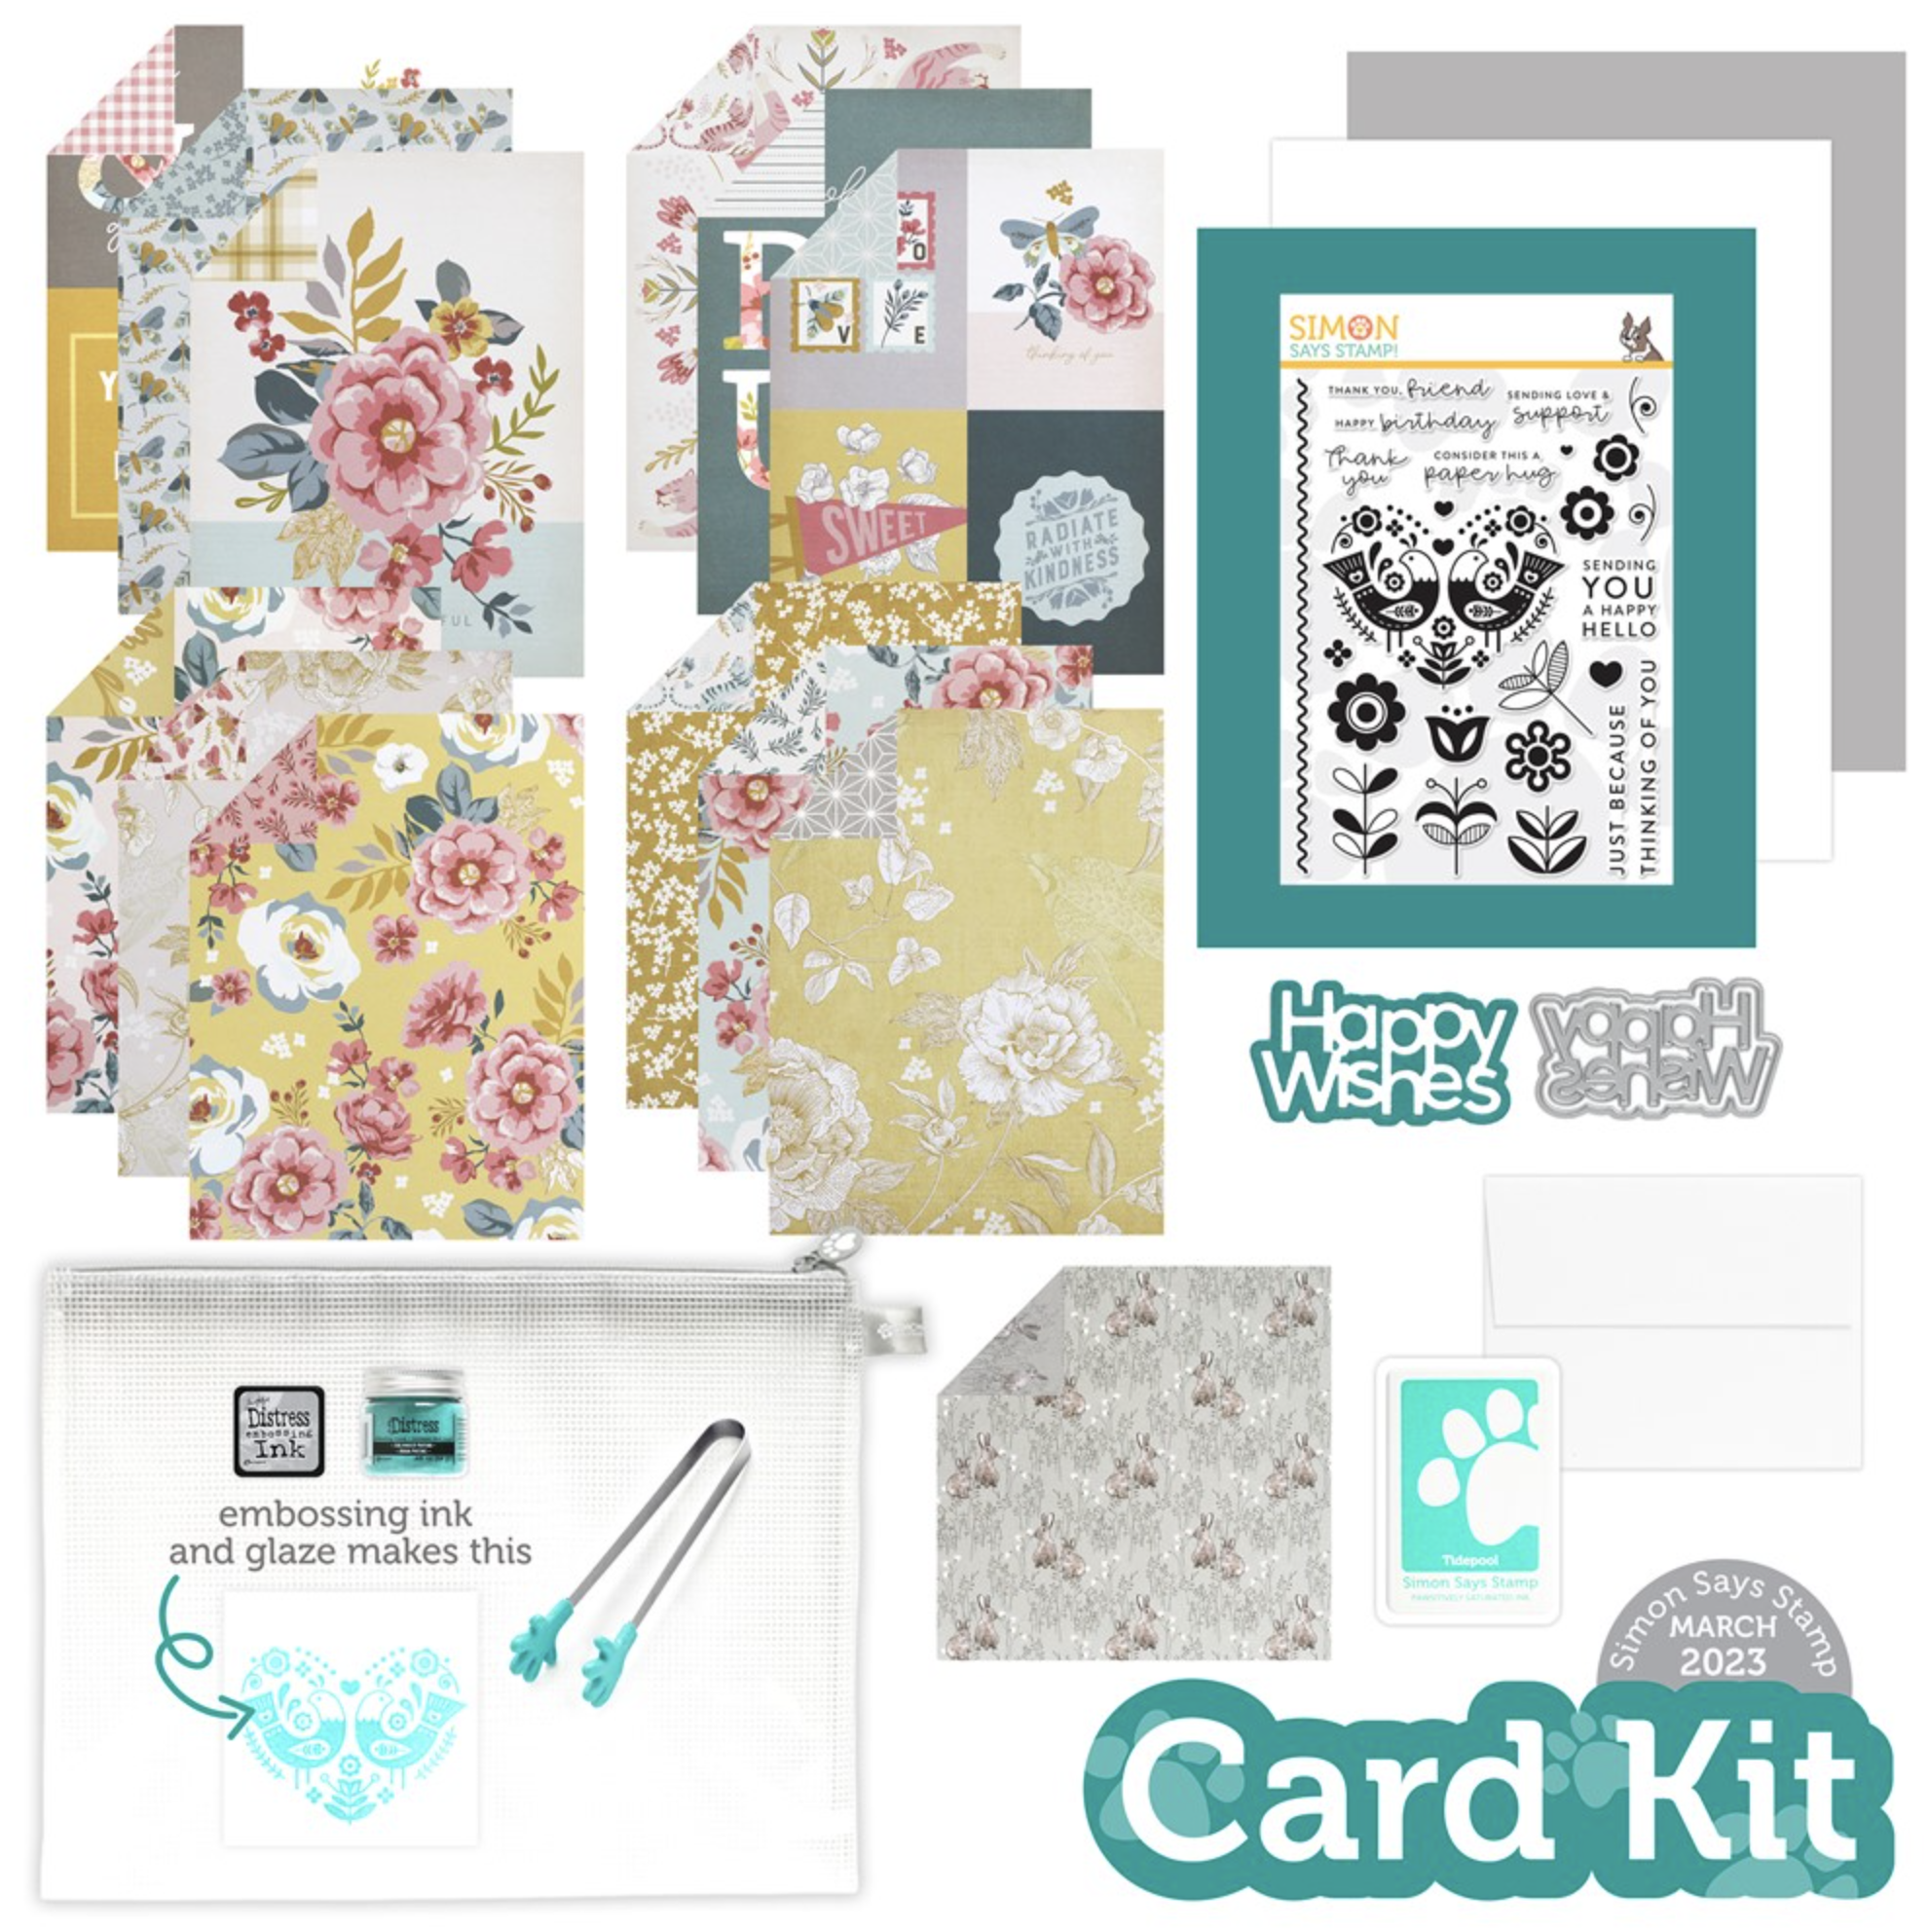 Simon Says Stamp, March 2023 Card Kit